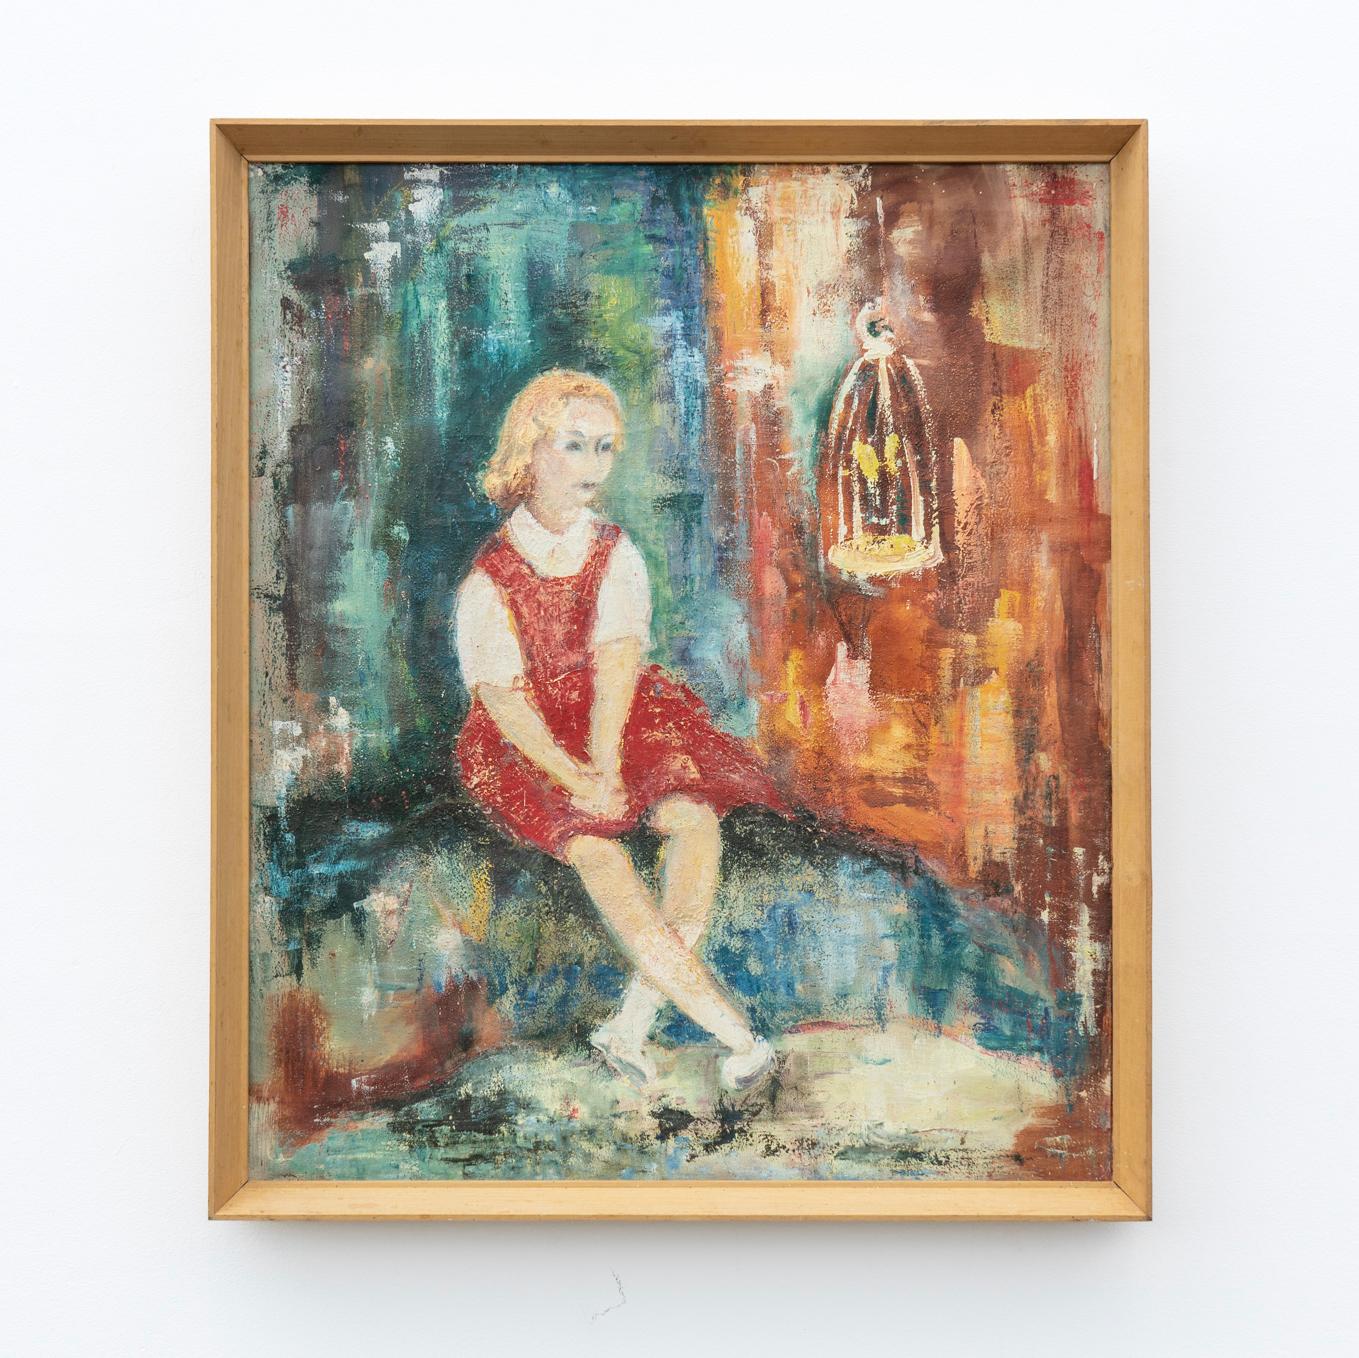 MID CENTURY COLOURFUL OIL PAINTING DEPICTING A SEATED GIRL IN A ROOM WITH TWO CANARIES IN A BIRDCAGE
An ethereal dreamy scene which skilfully captures the mood.

Confidently painted with a bold, expressionist colour palette using stylised